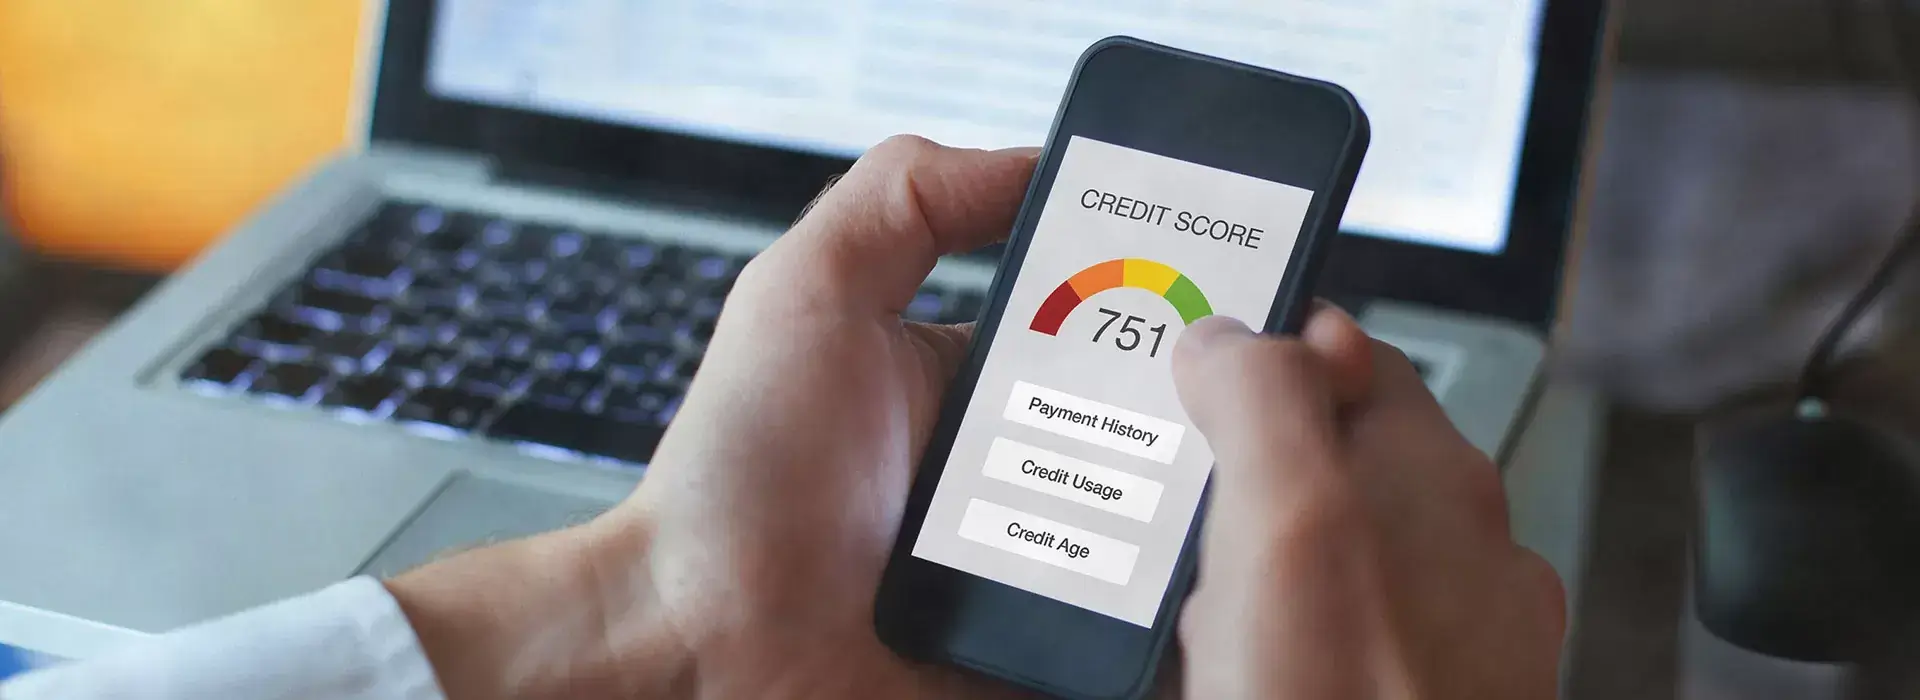 5 ways to boost your credit score